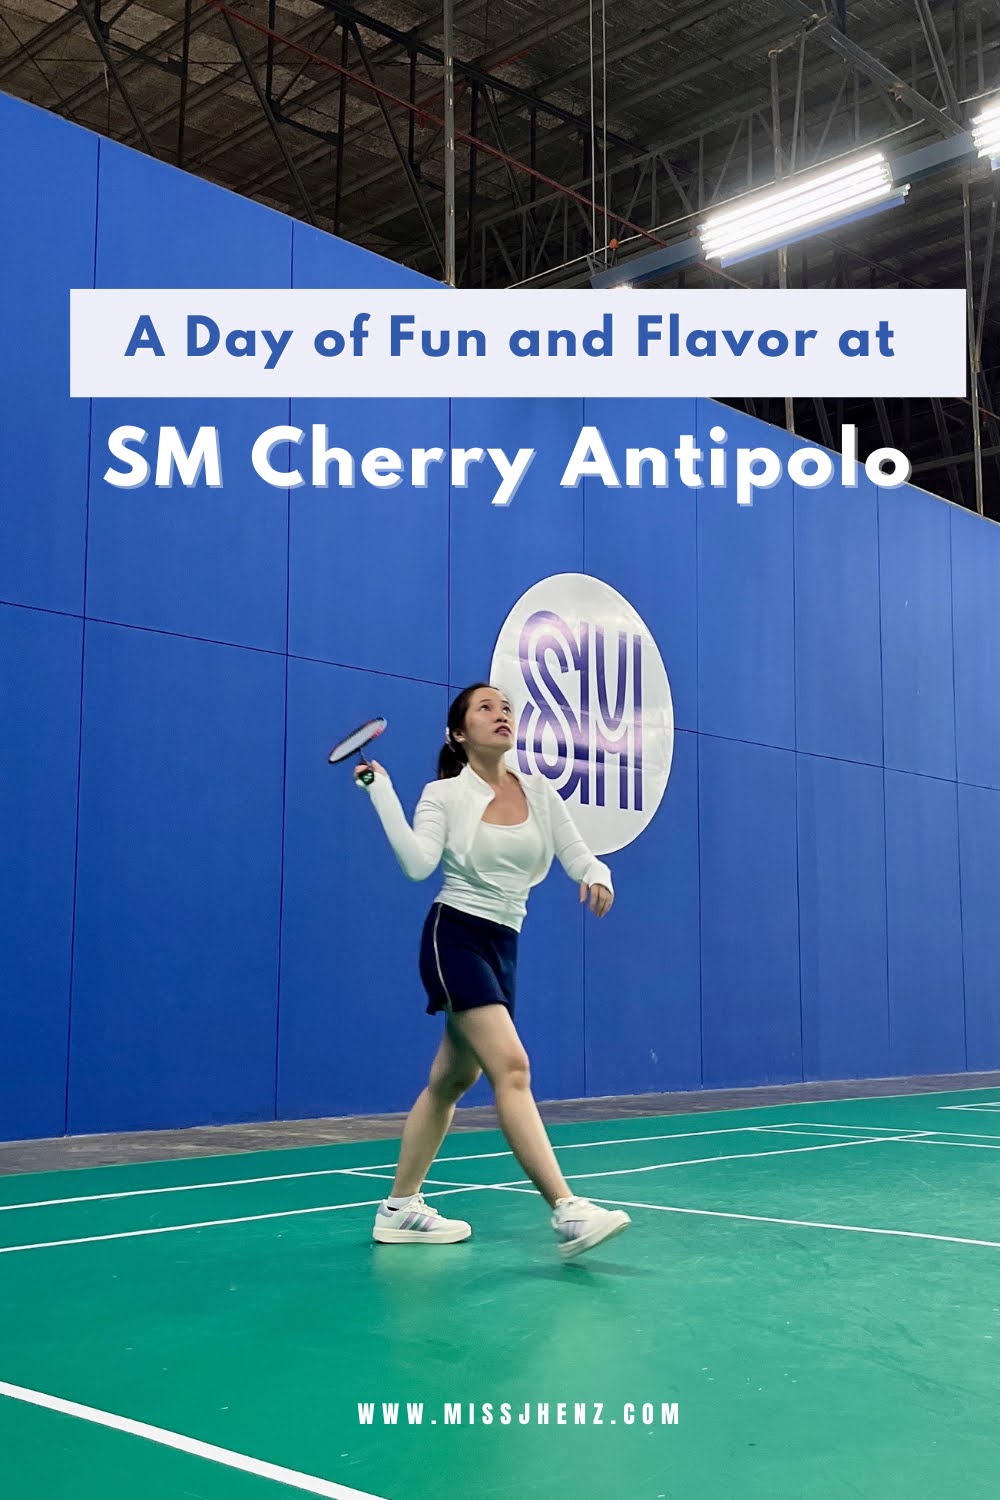 A Day of Fun and Flavor at SM Cherry Antipolo